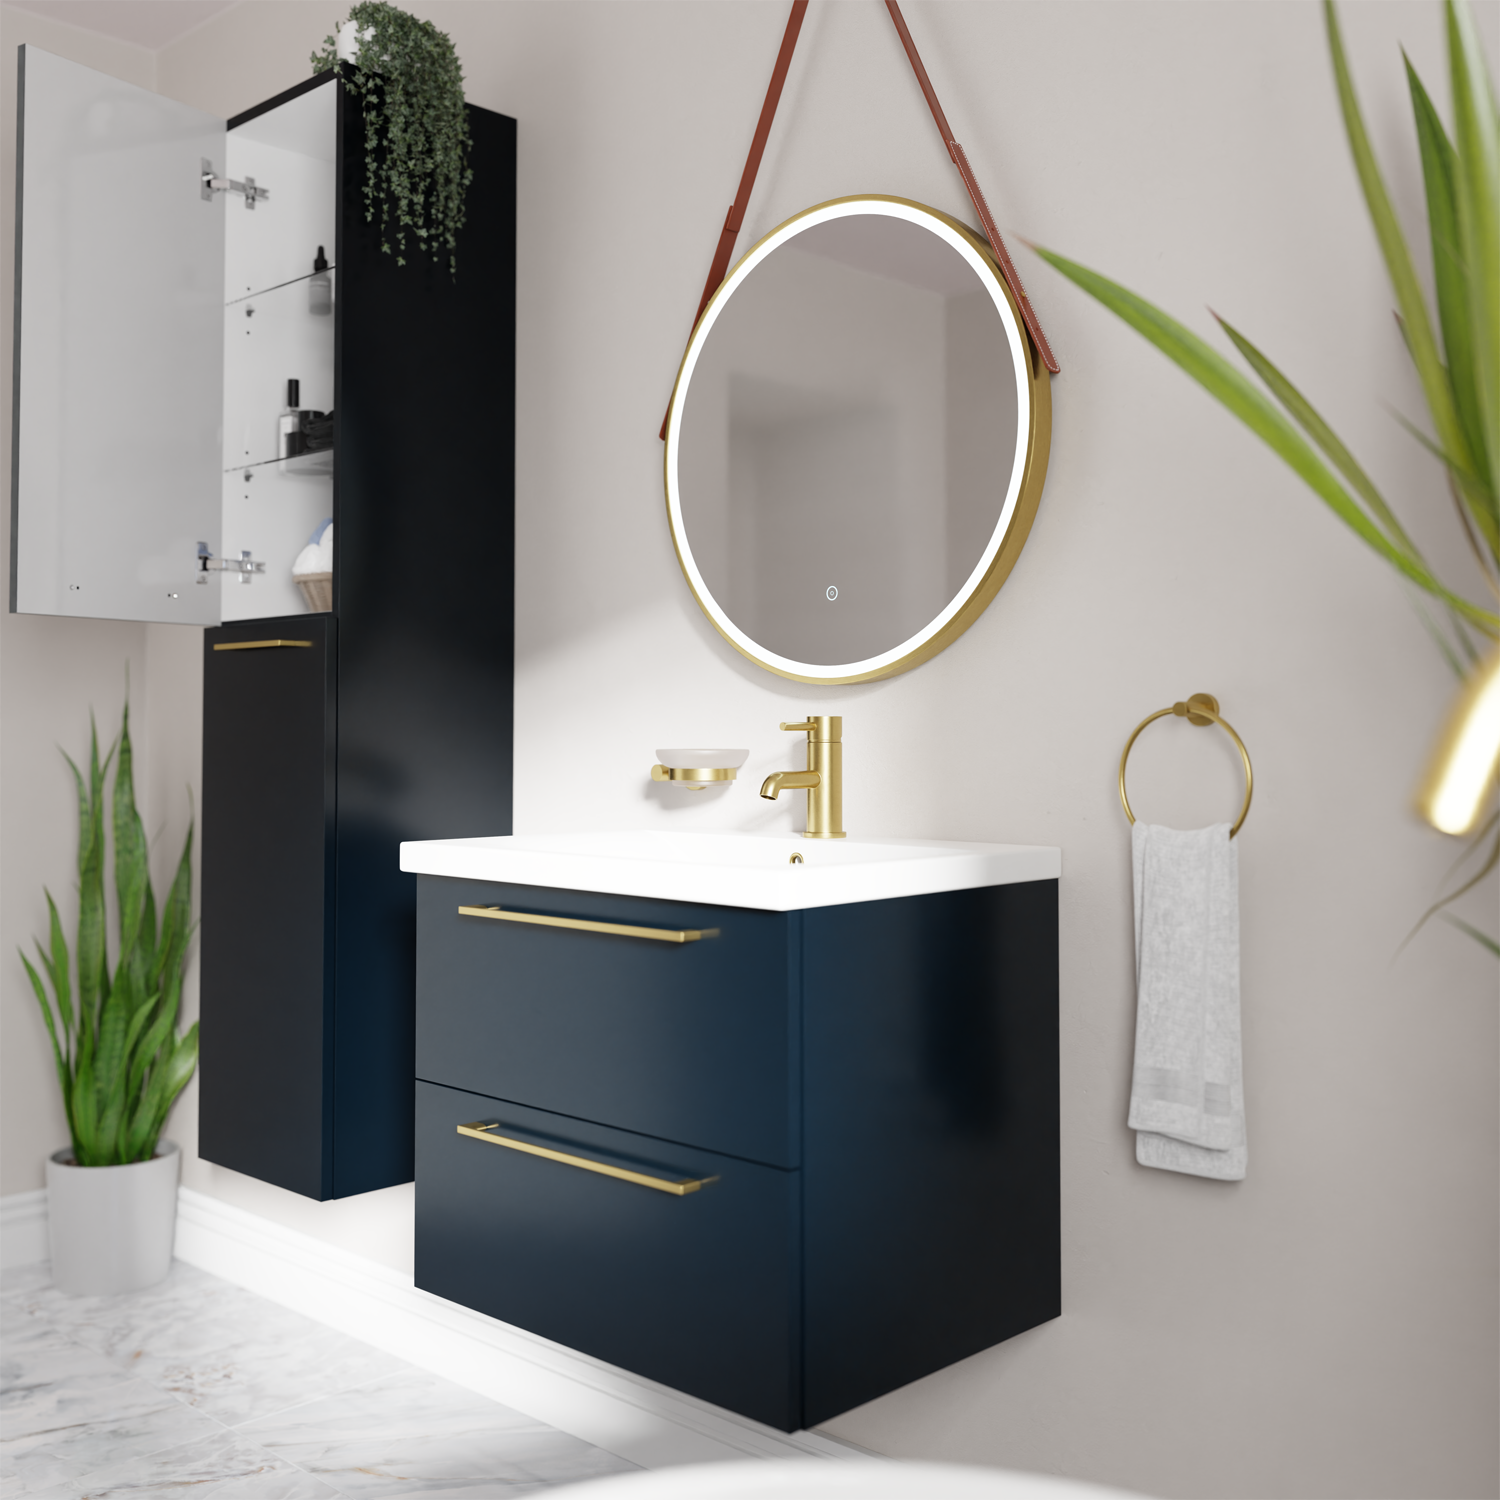 Napoli deep blue wall-hung bathroom vanity unit with brushed brass handles